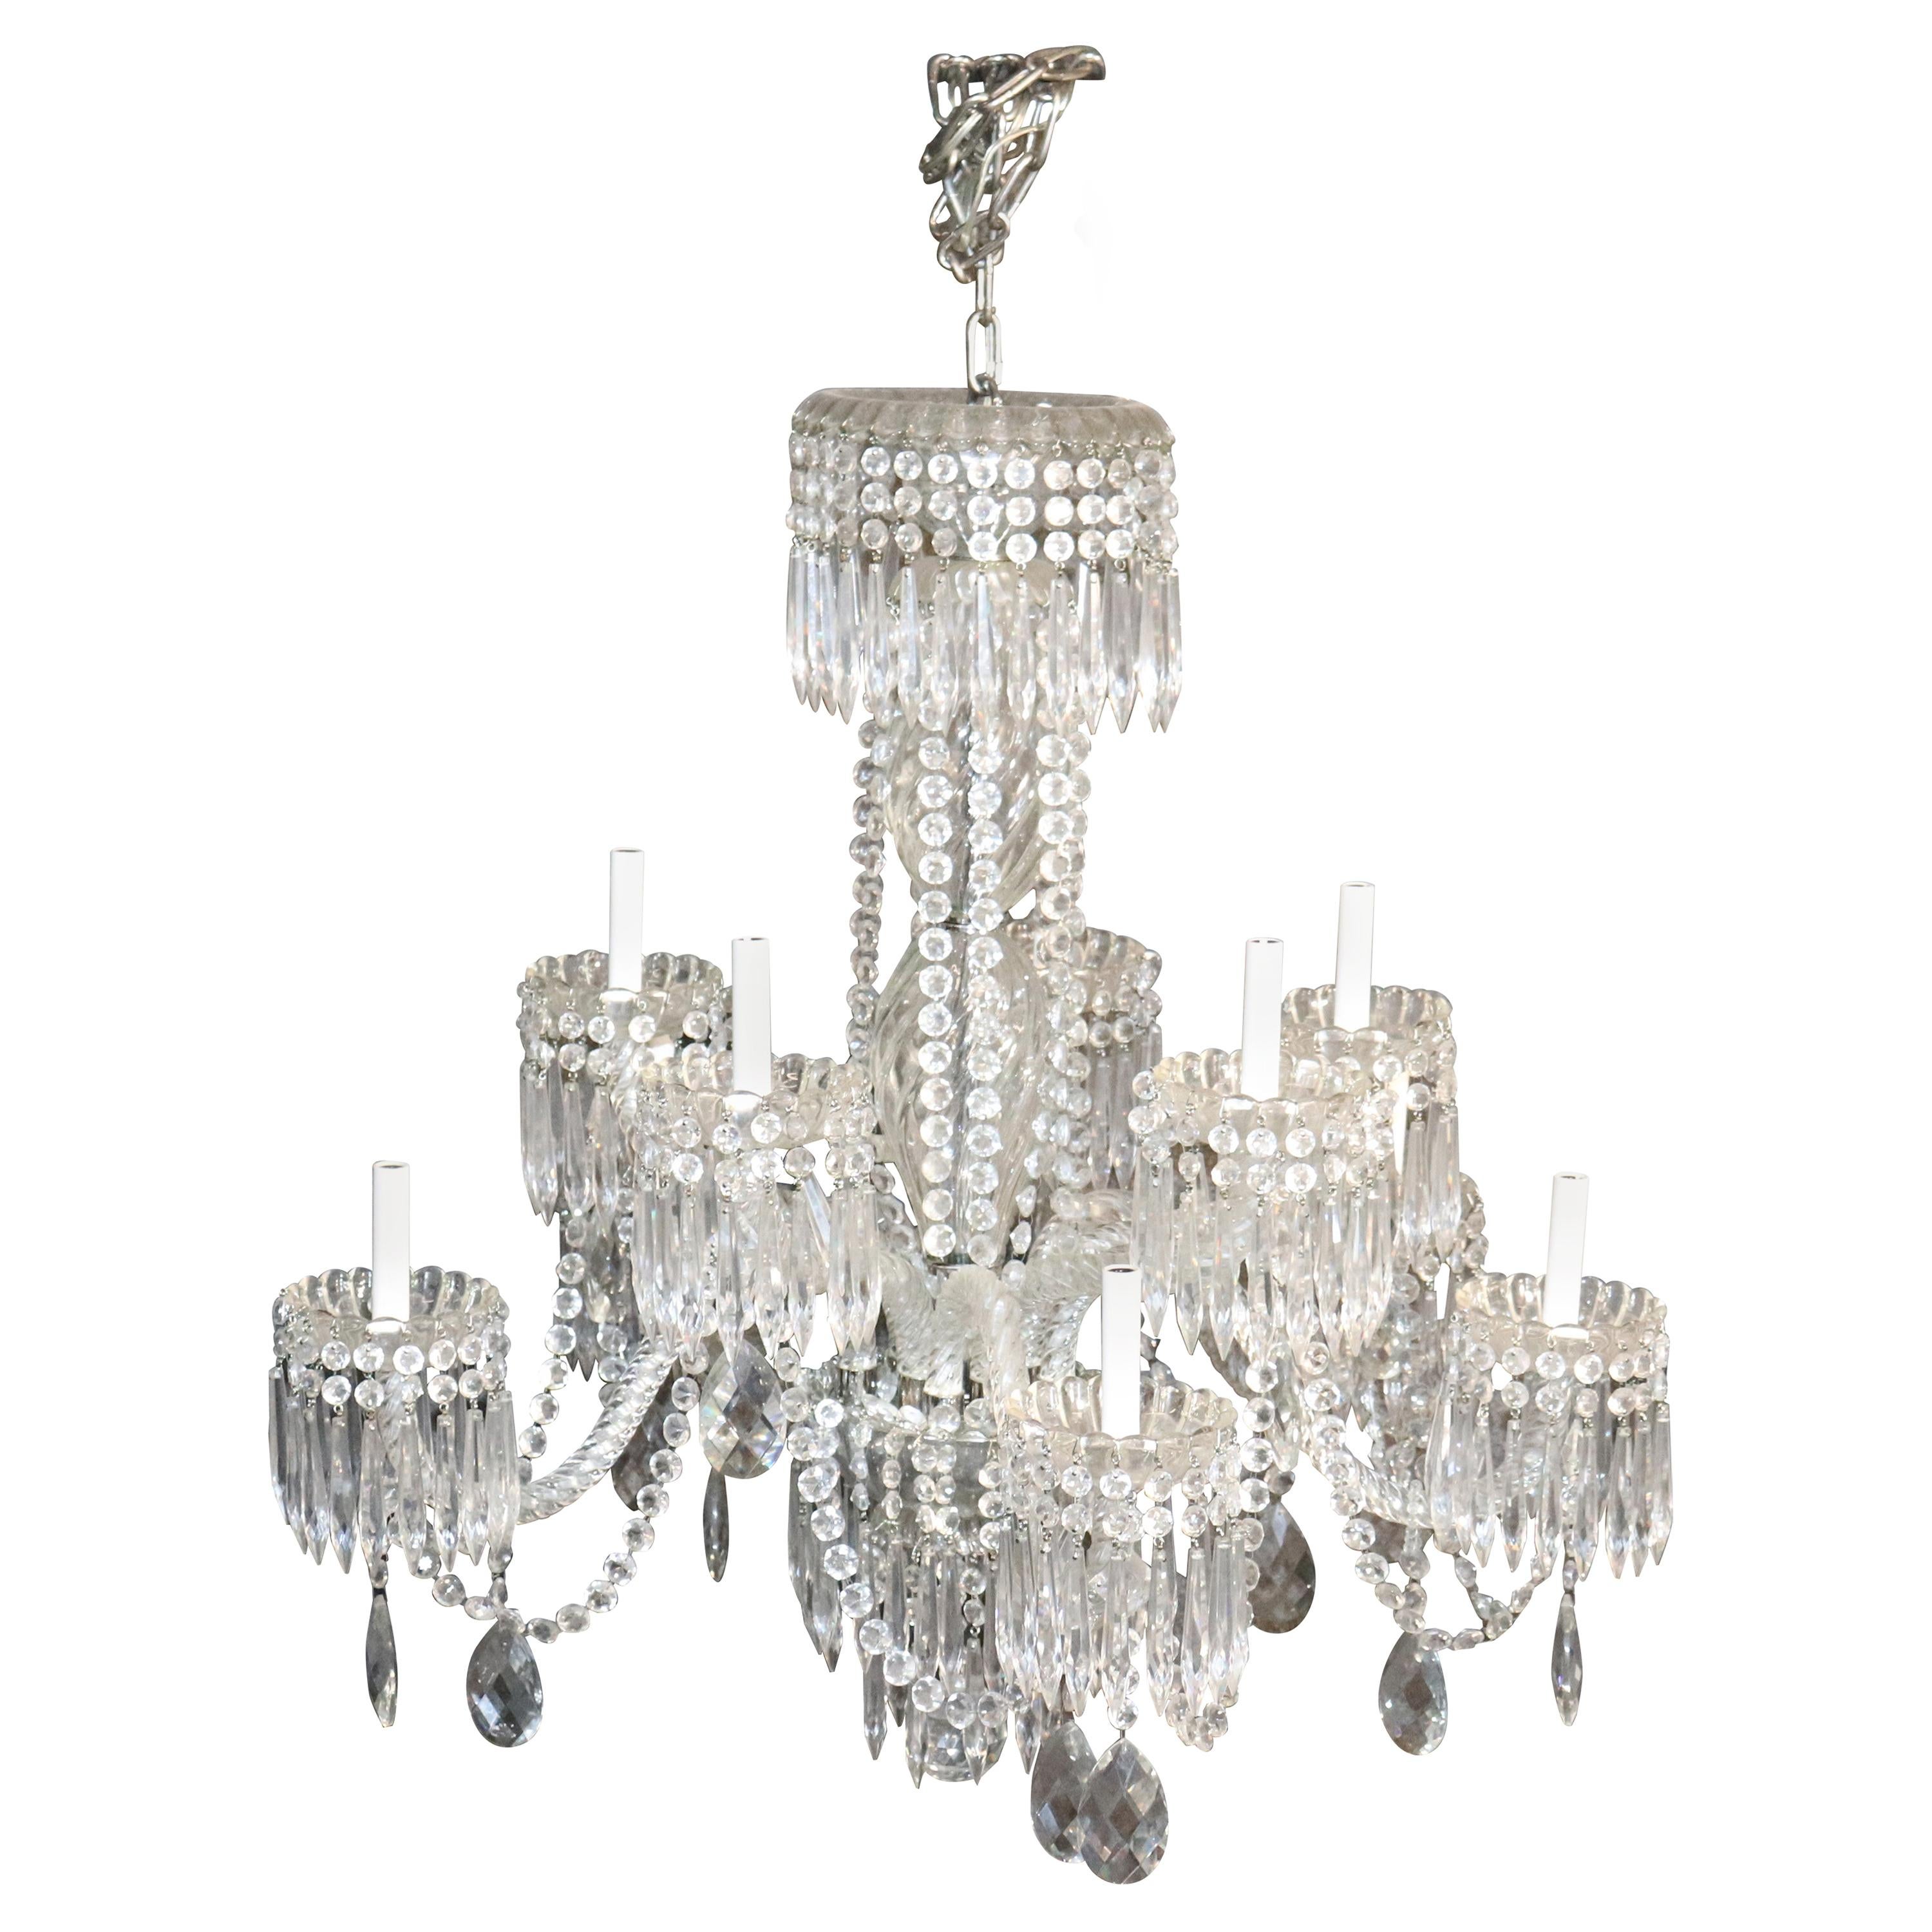 Large Antique circa 1920s Era Waterford Crystal 8-Light Chandelier